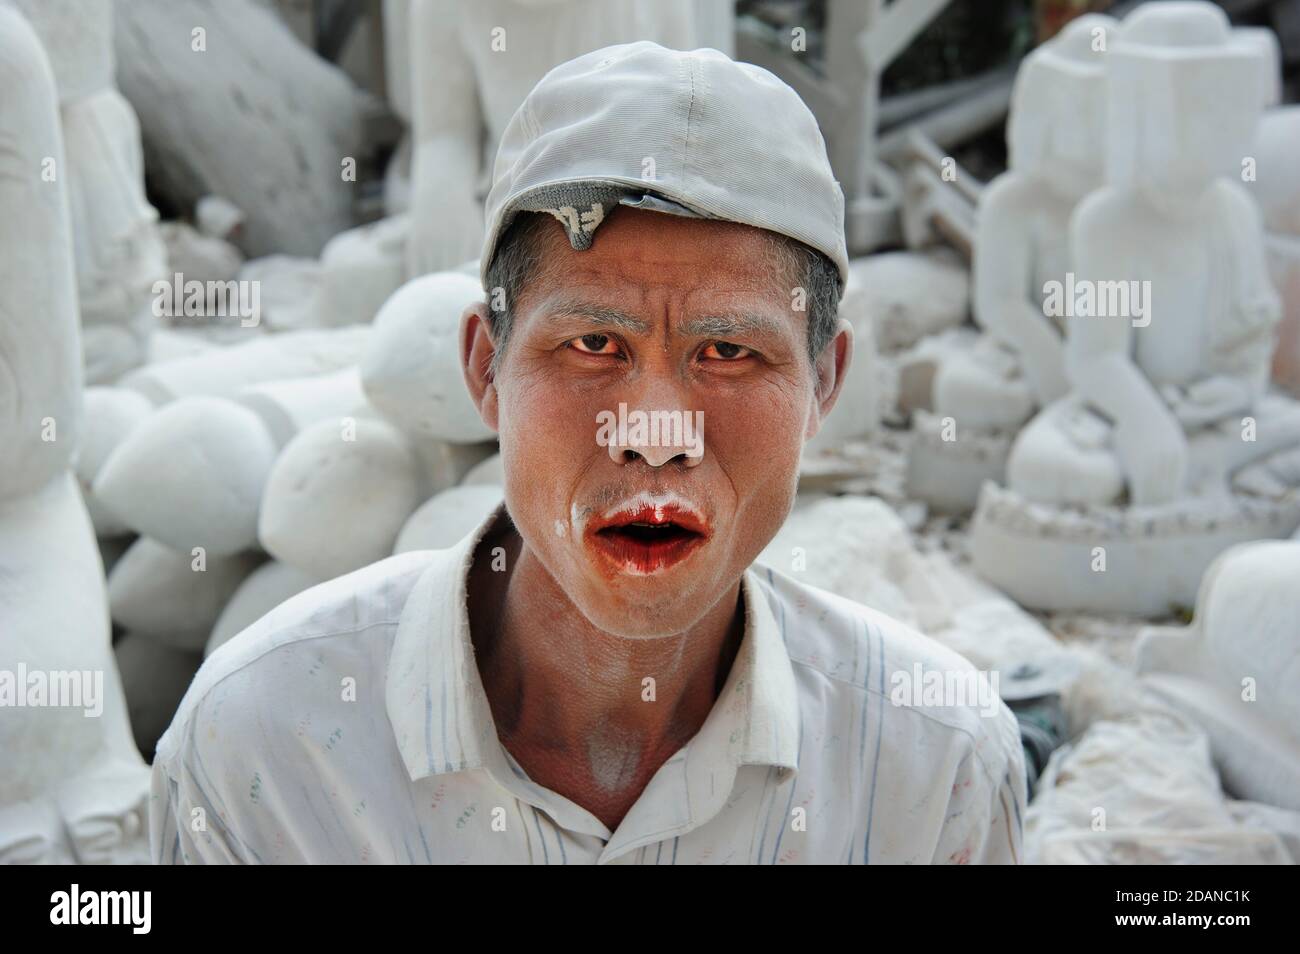 the ghostly a Burmese marble carver covered in fine white marble powder his mouth stained red from chewing betel nut giving him a ghostly haunted look Stock Photo